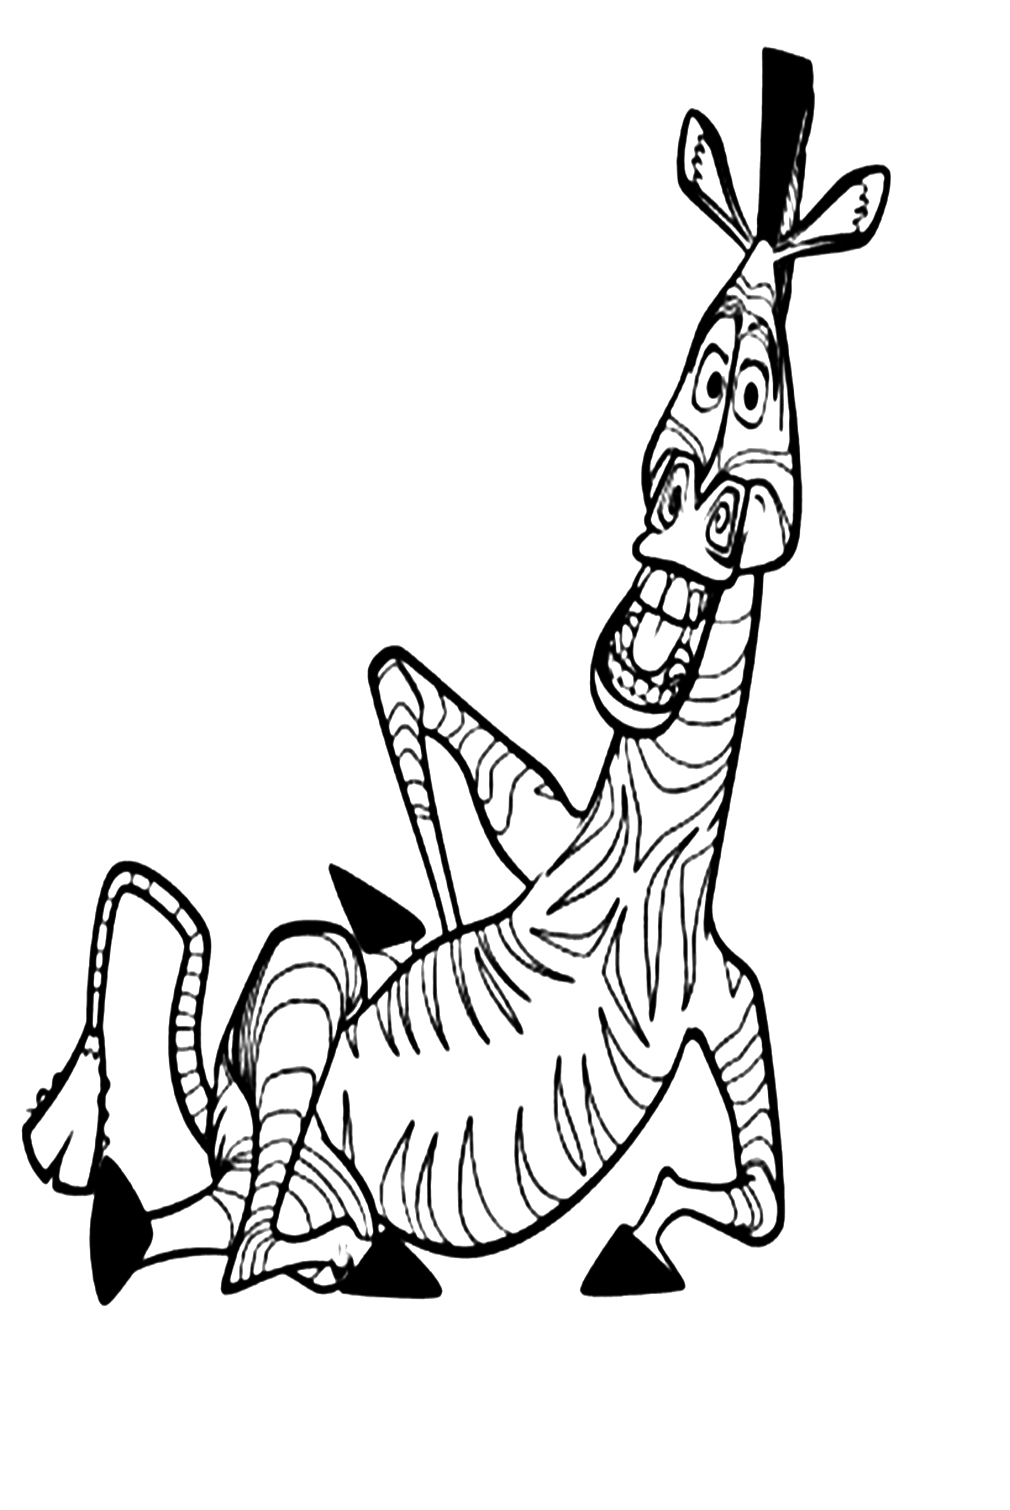 Awesome Marty Zebra Coloring Pages